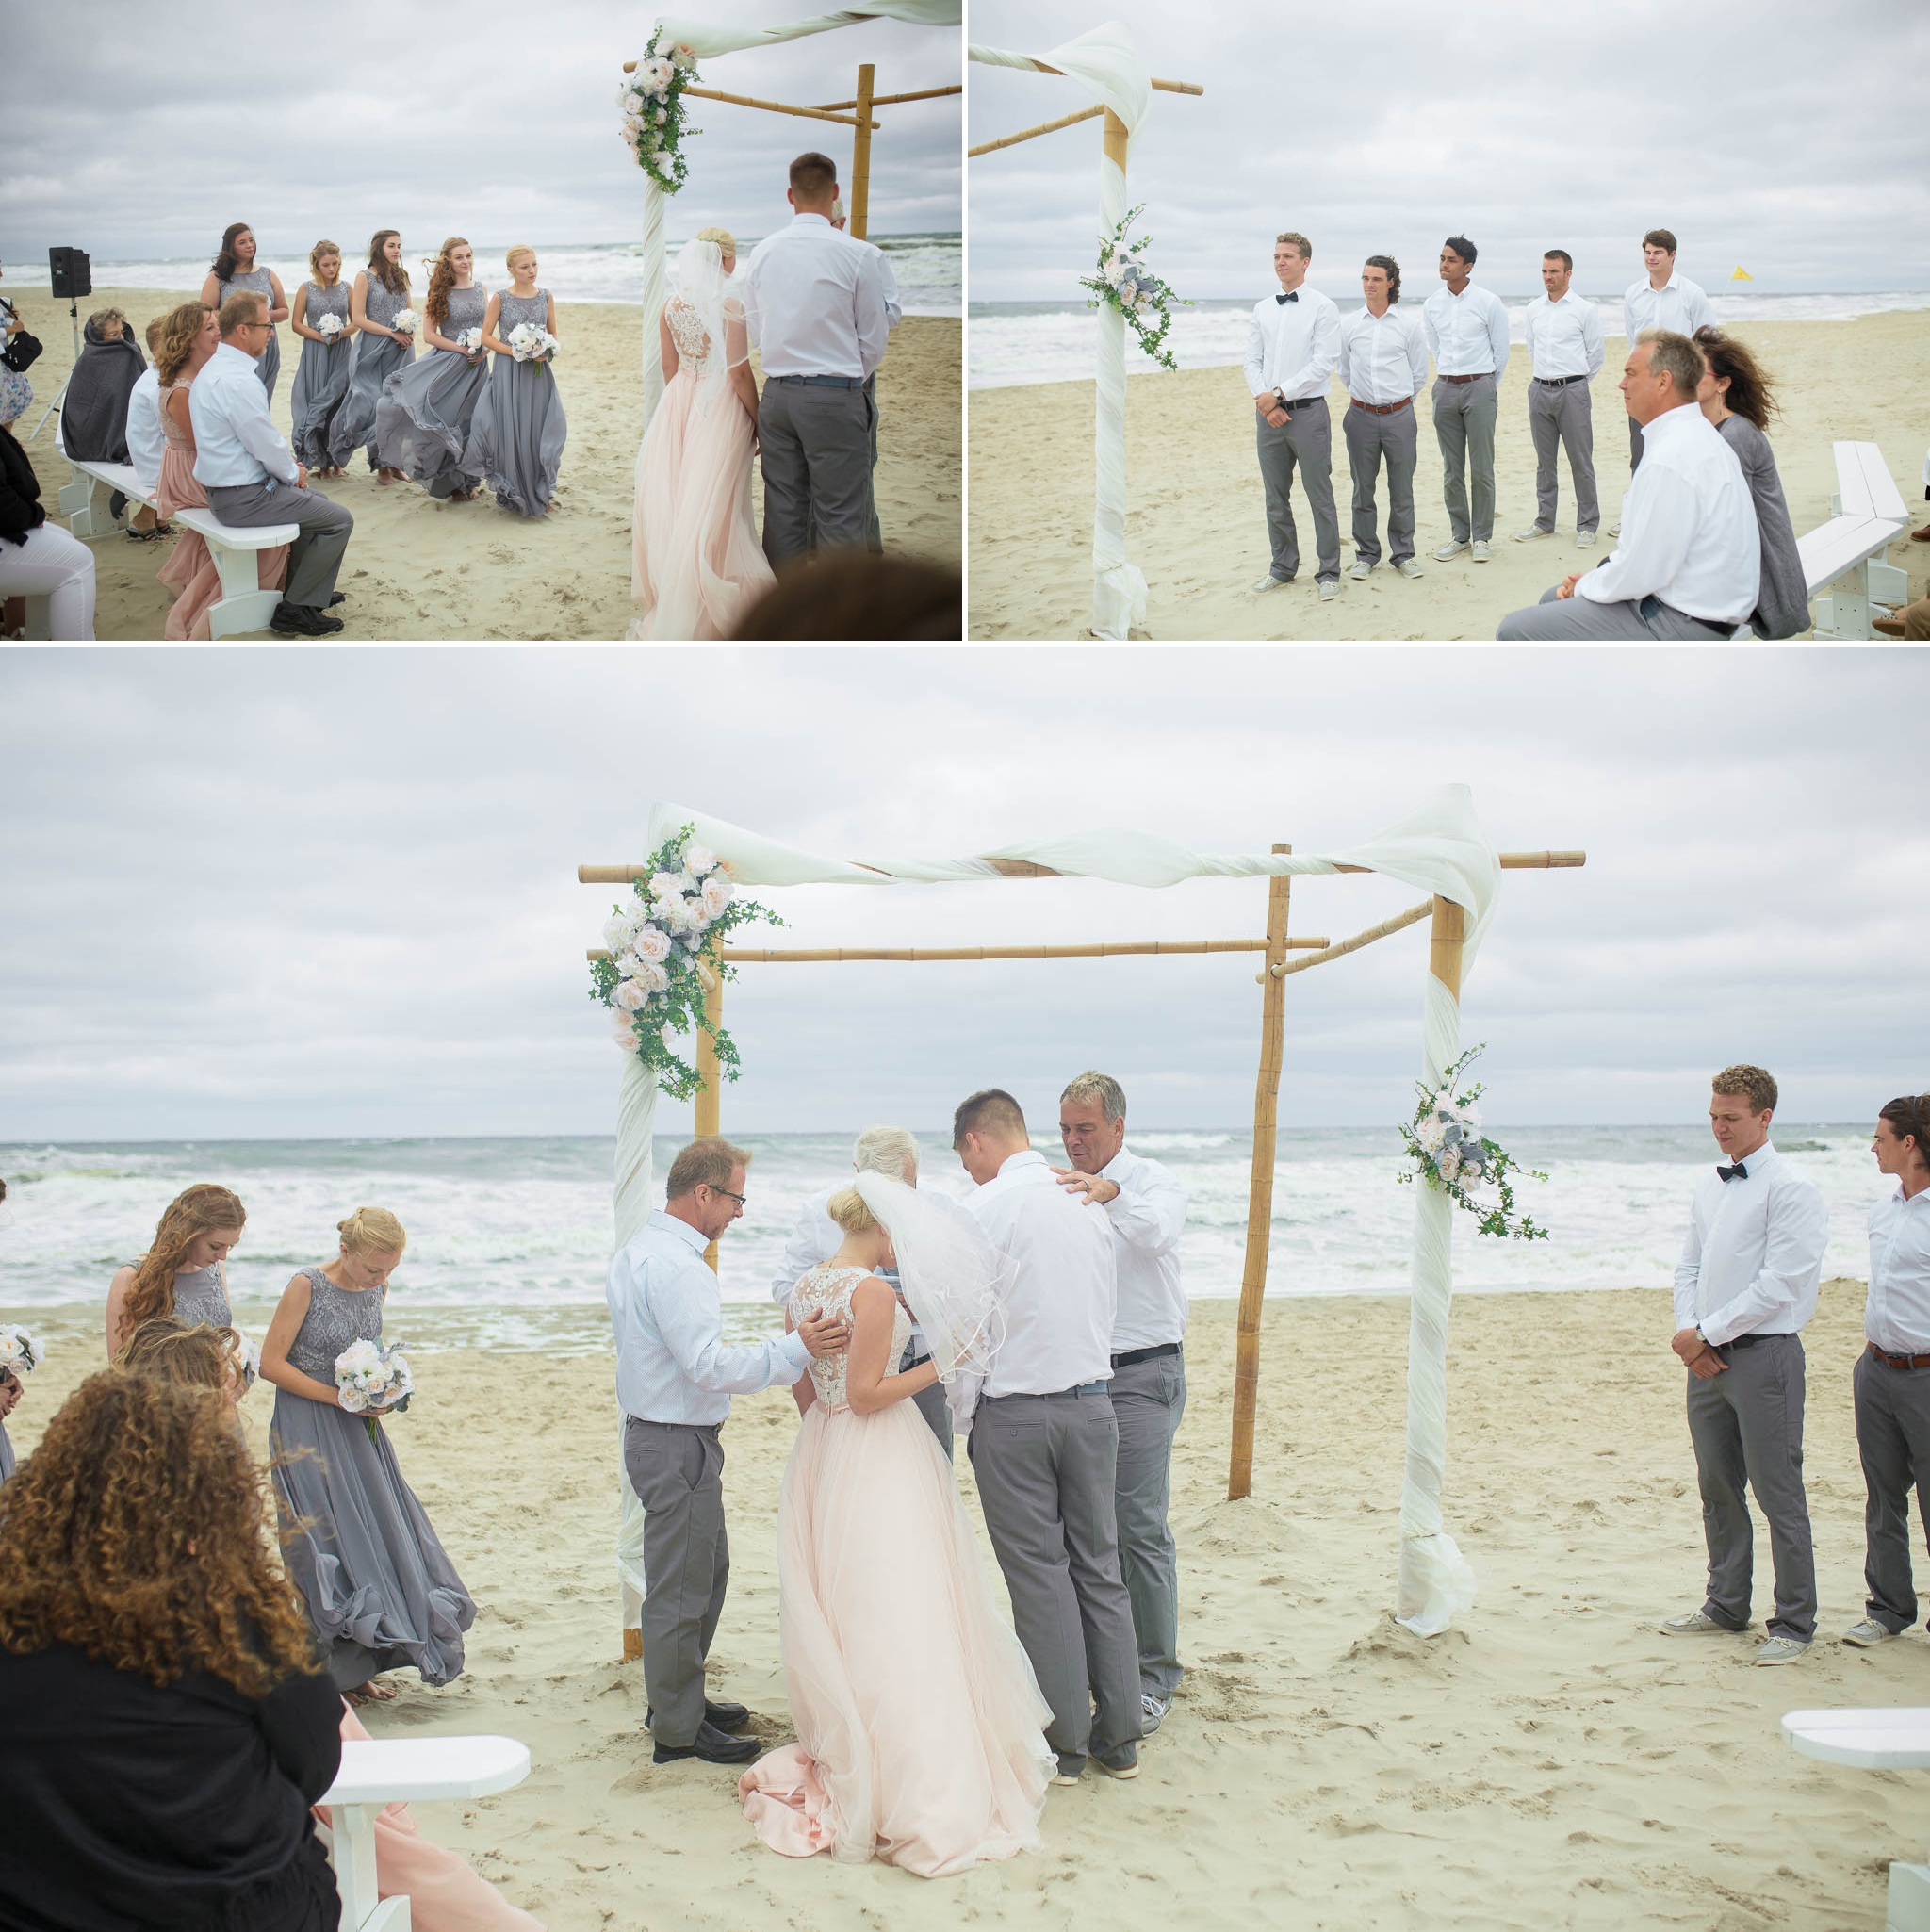 Wedding Photography at Pelicans Landing in Corolla, NC - Outer Banks North Carolina Wedding Photographer - Avery and Kirk Sanders 